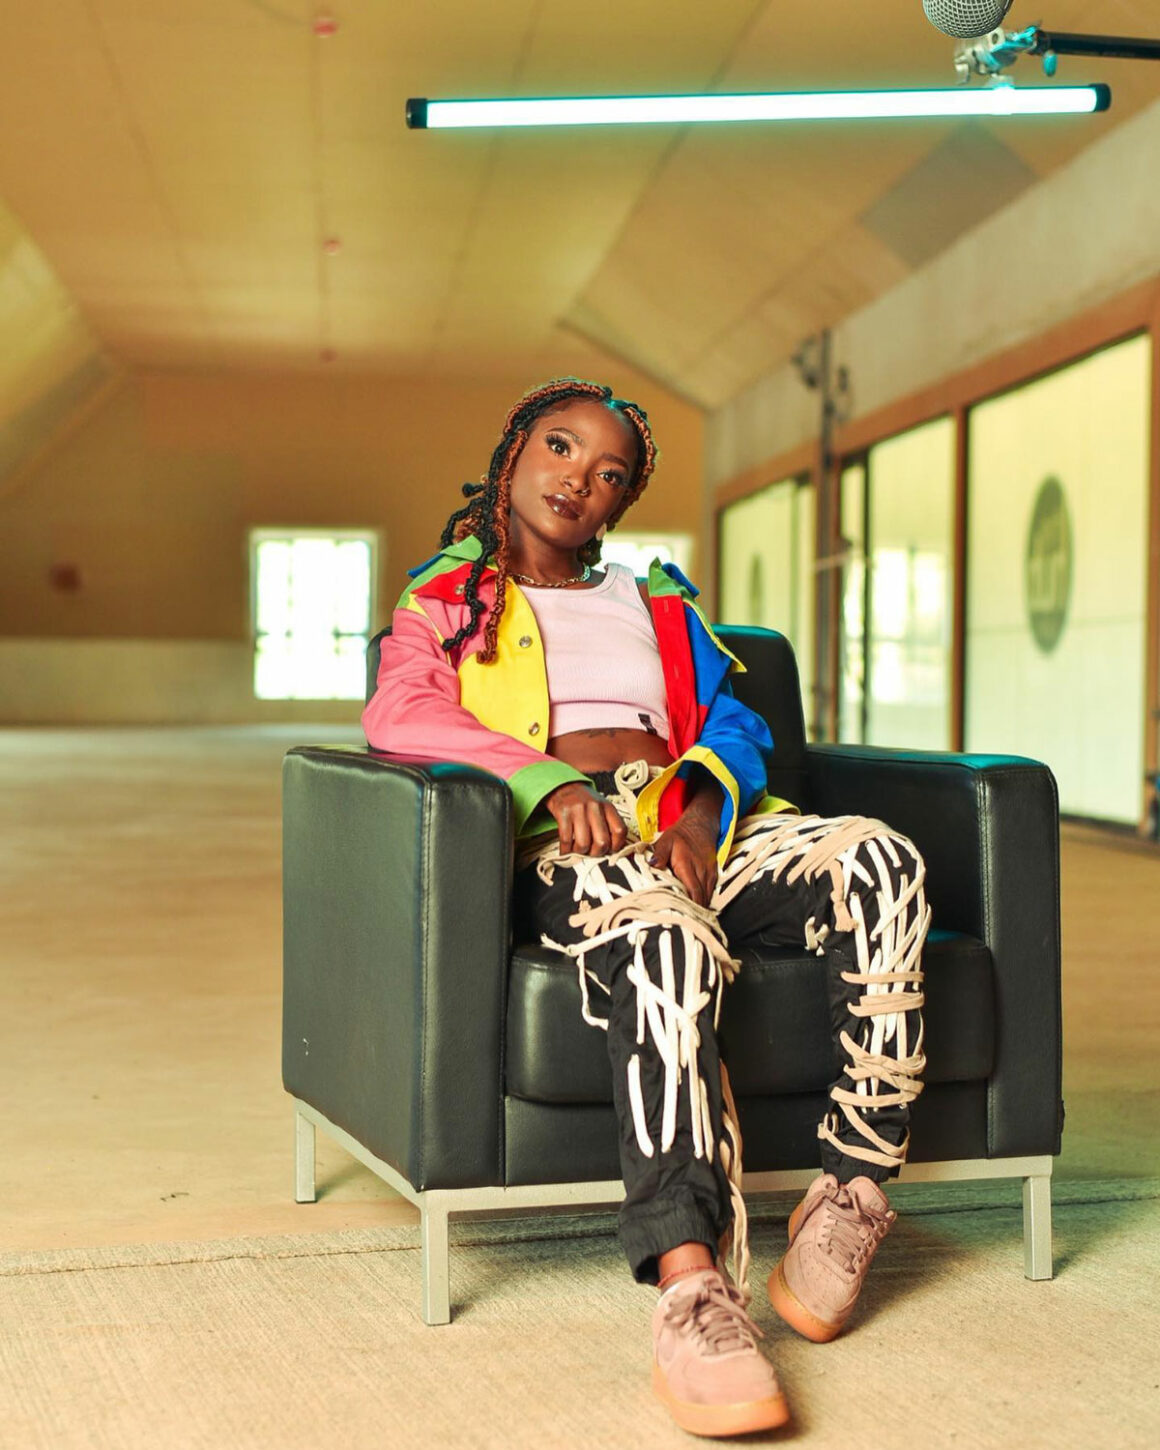 Introducing herself to Kenyan music fans in 2019, Xenia has grown in the years since then to become an artist revered for displaying a respectable emotional fortitude. | Image: Xenia Manasseh